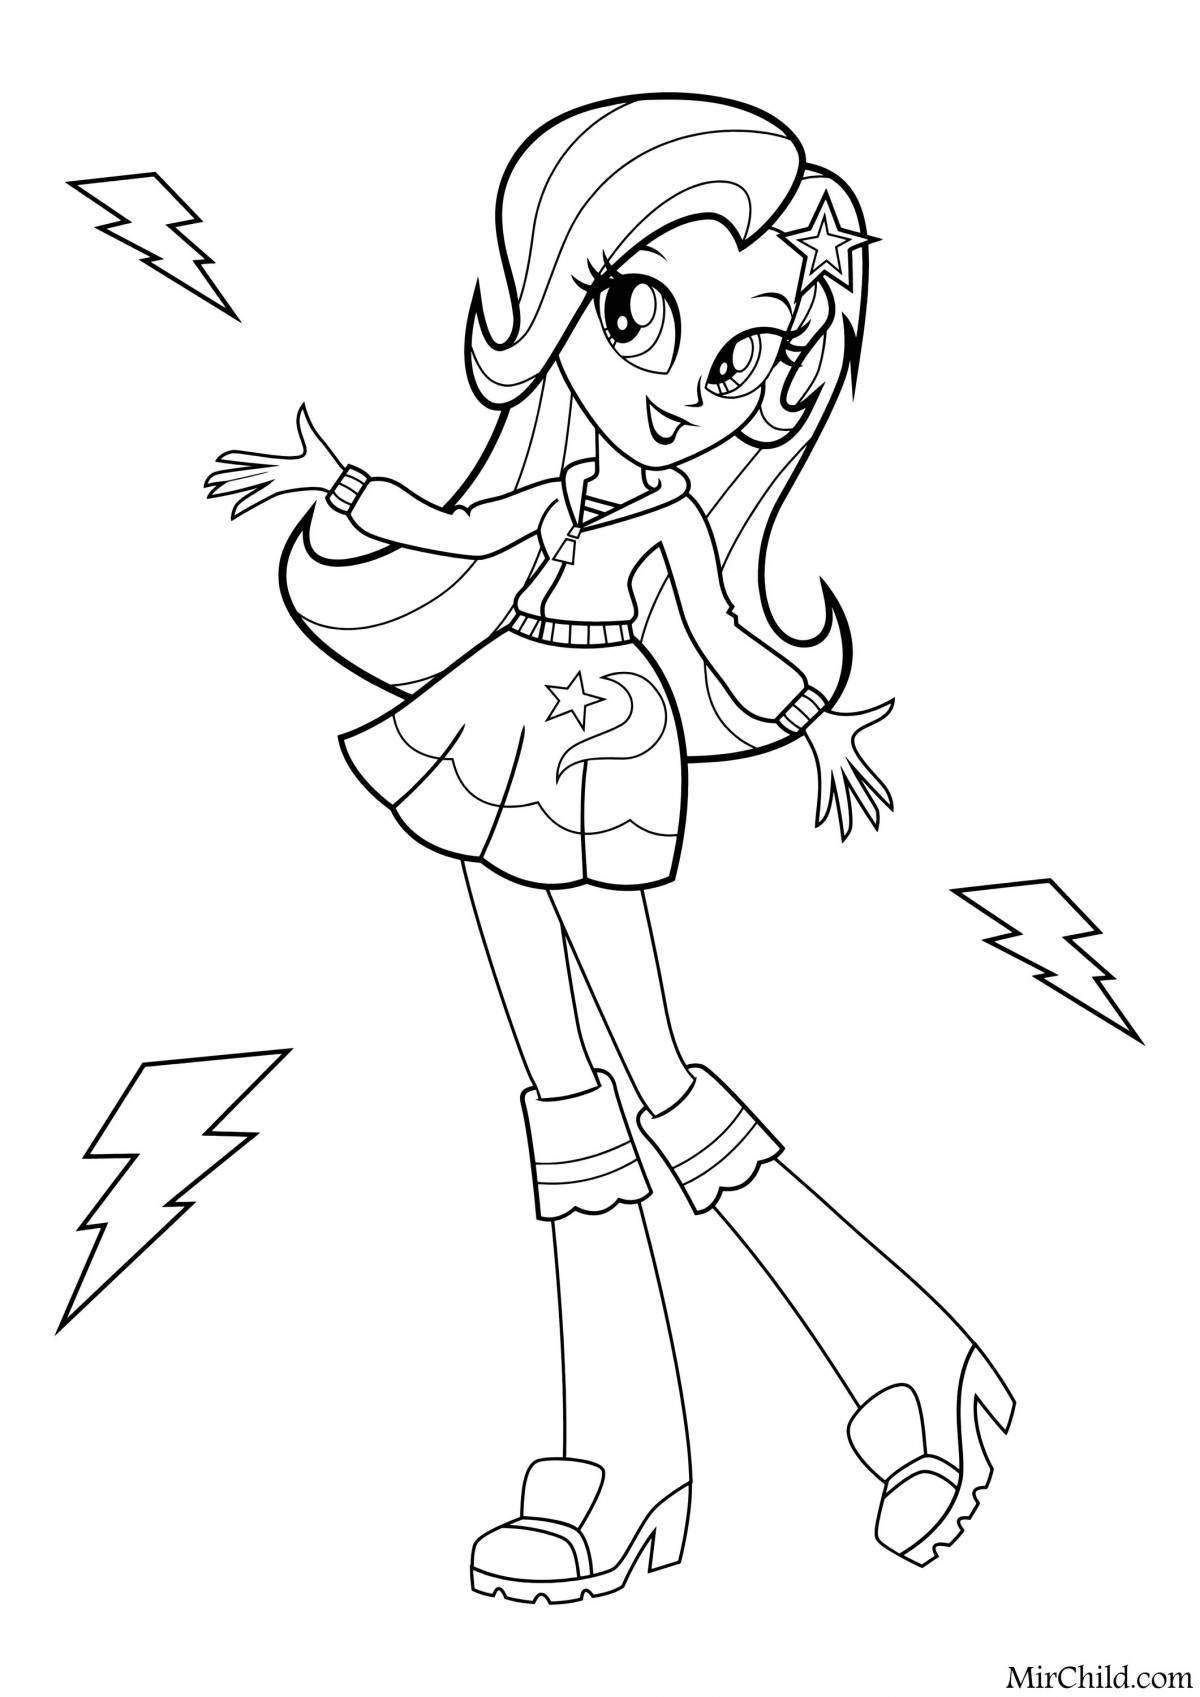 Coloring page adorable trixie pony